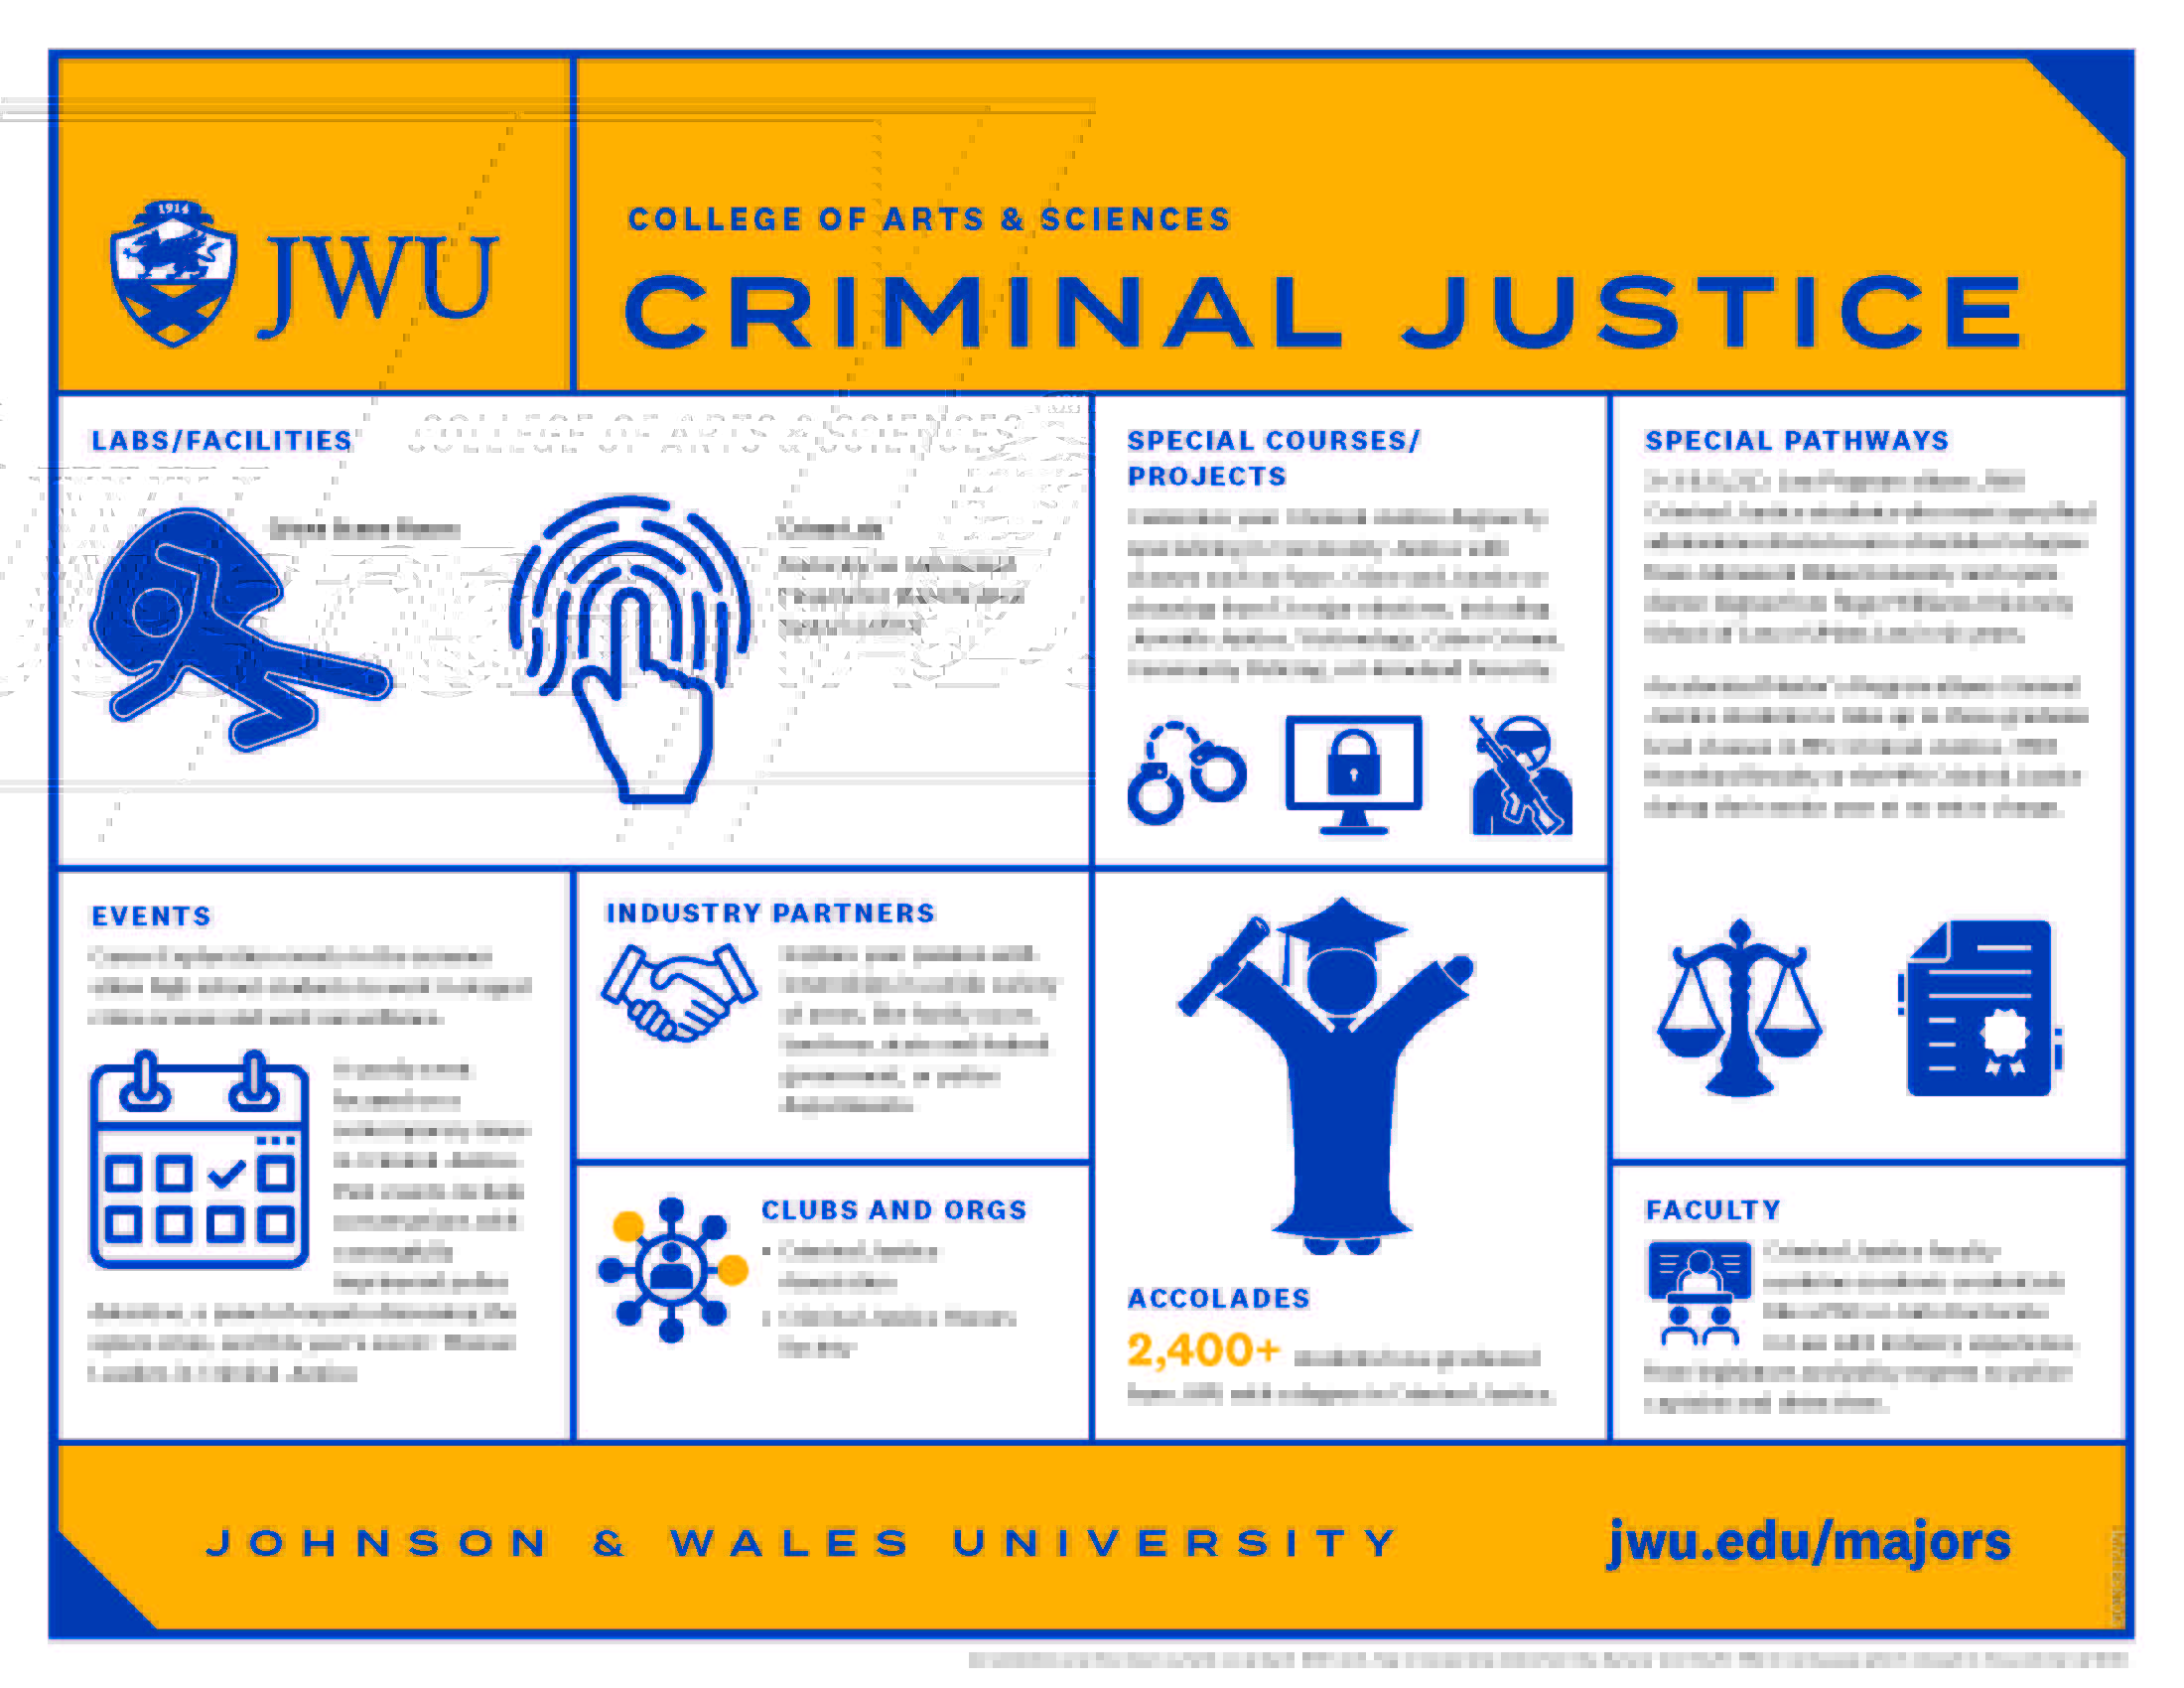 Infographic listing features of the JWU Criminal Justice B.S. including the state of the art facilities, special academic pathways students can take and taking specialty courses.